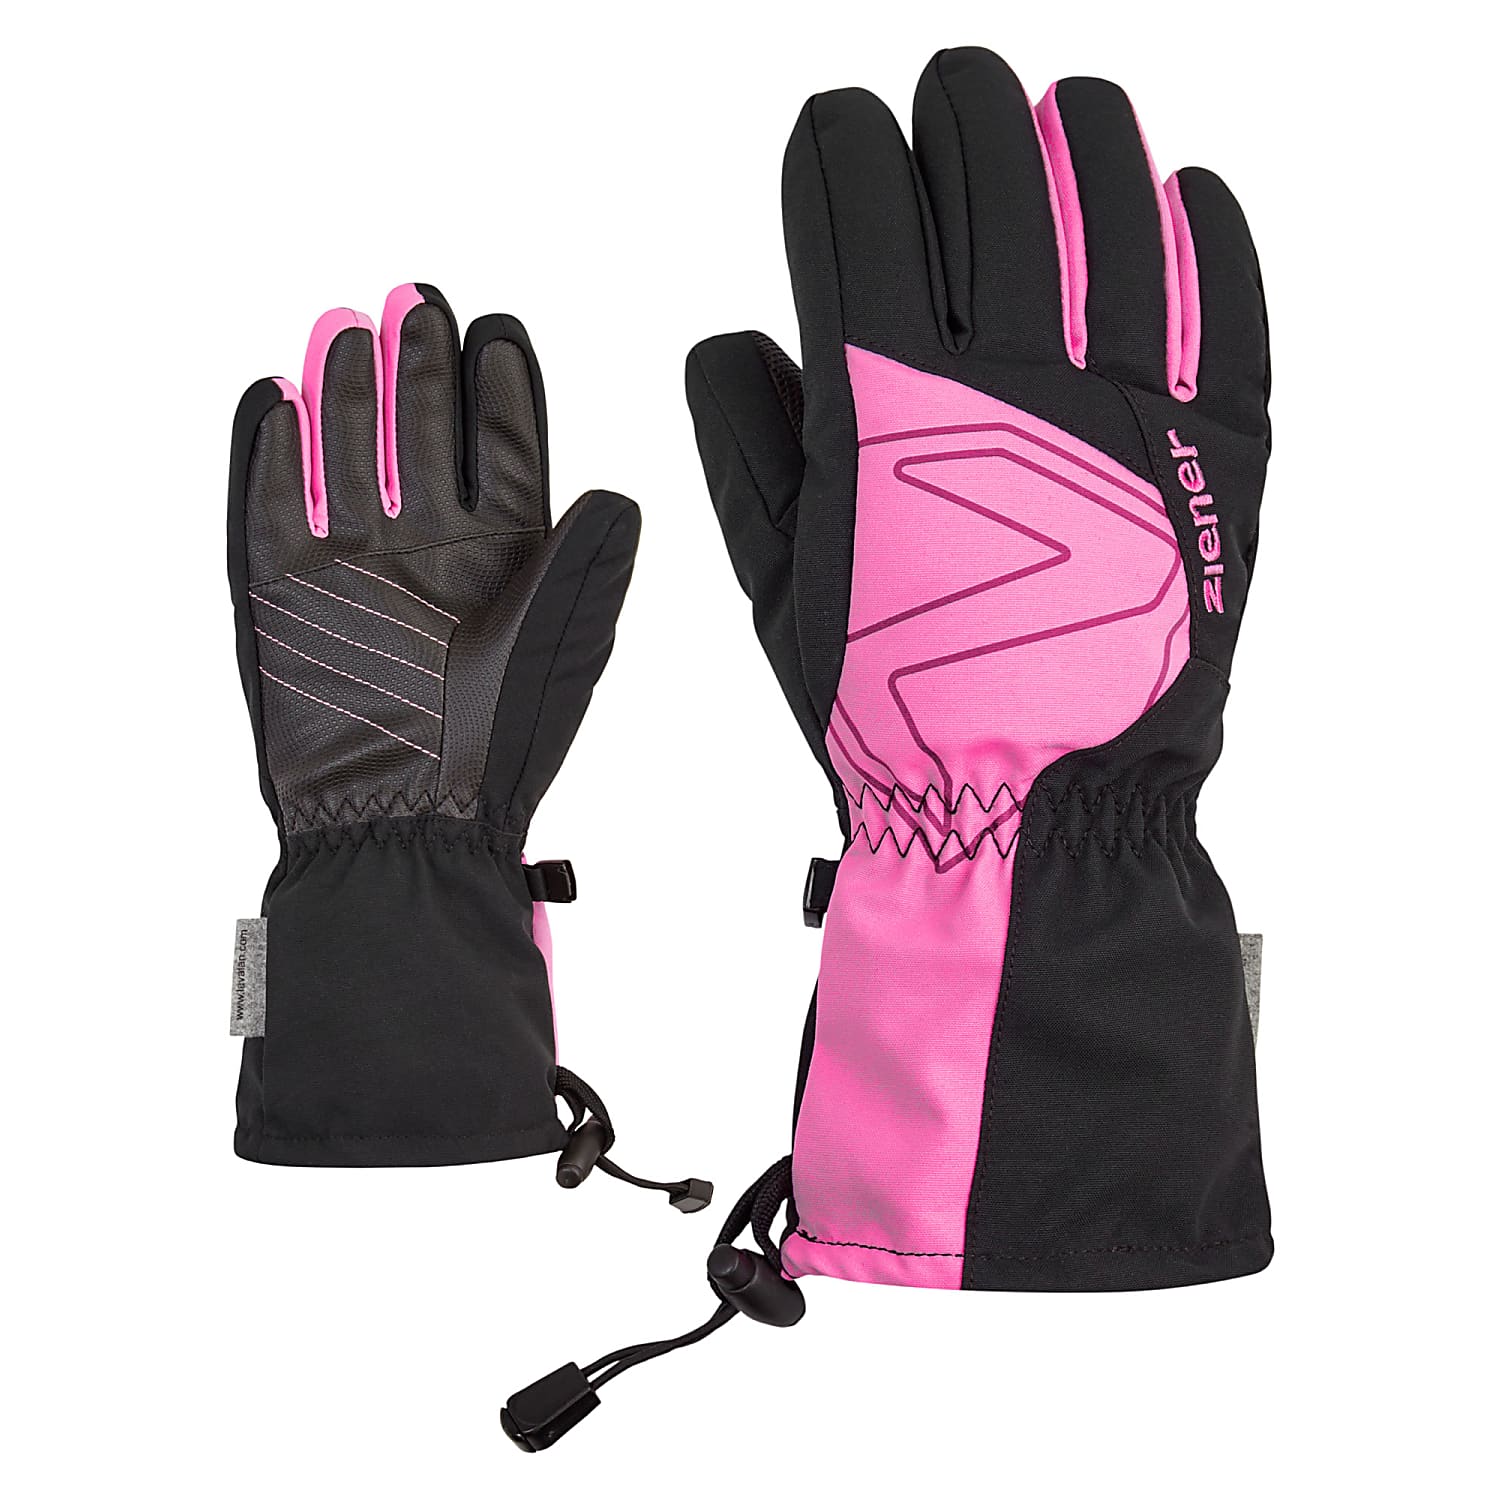 LAVAL Fast and JUNIOR Ziener - cheap AW AS shipping Pink Fuchsia GLOVE, Black -